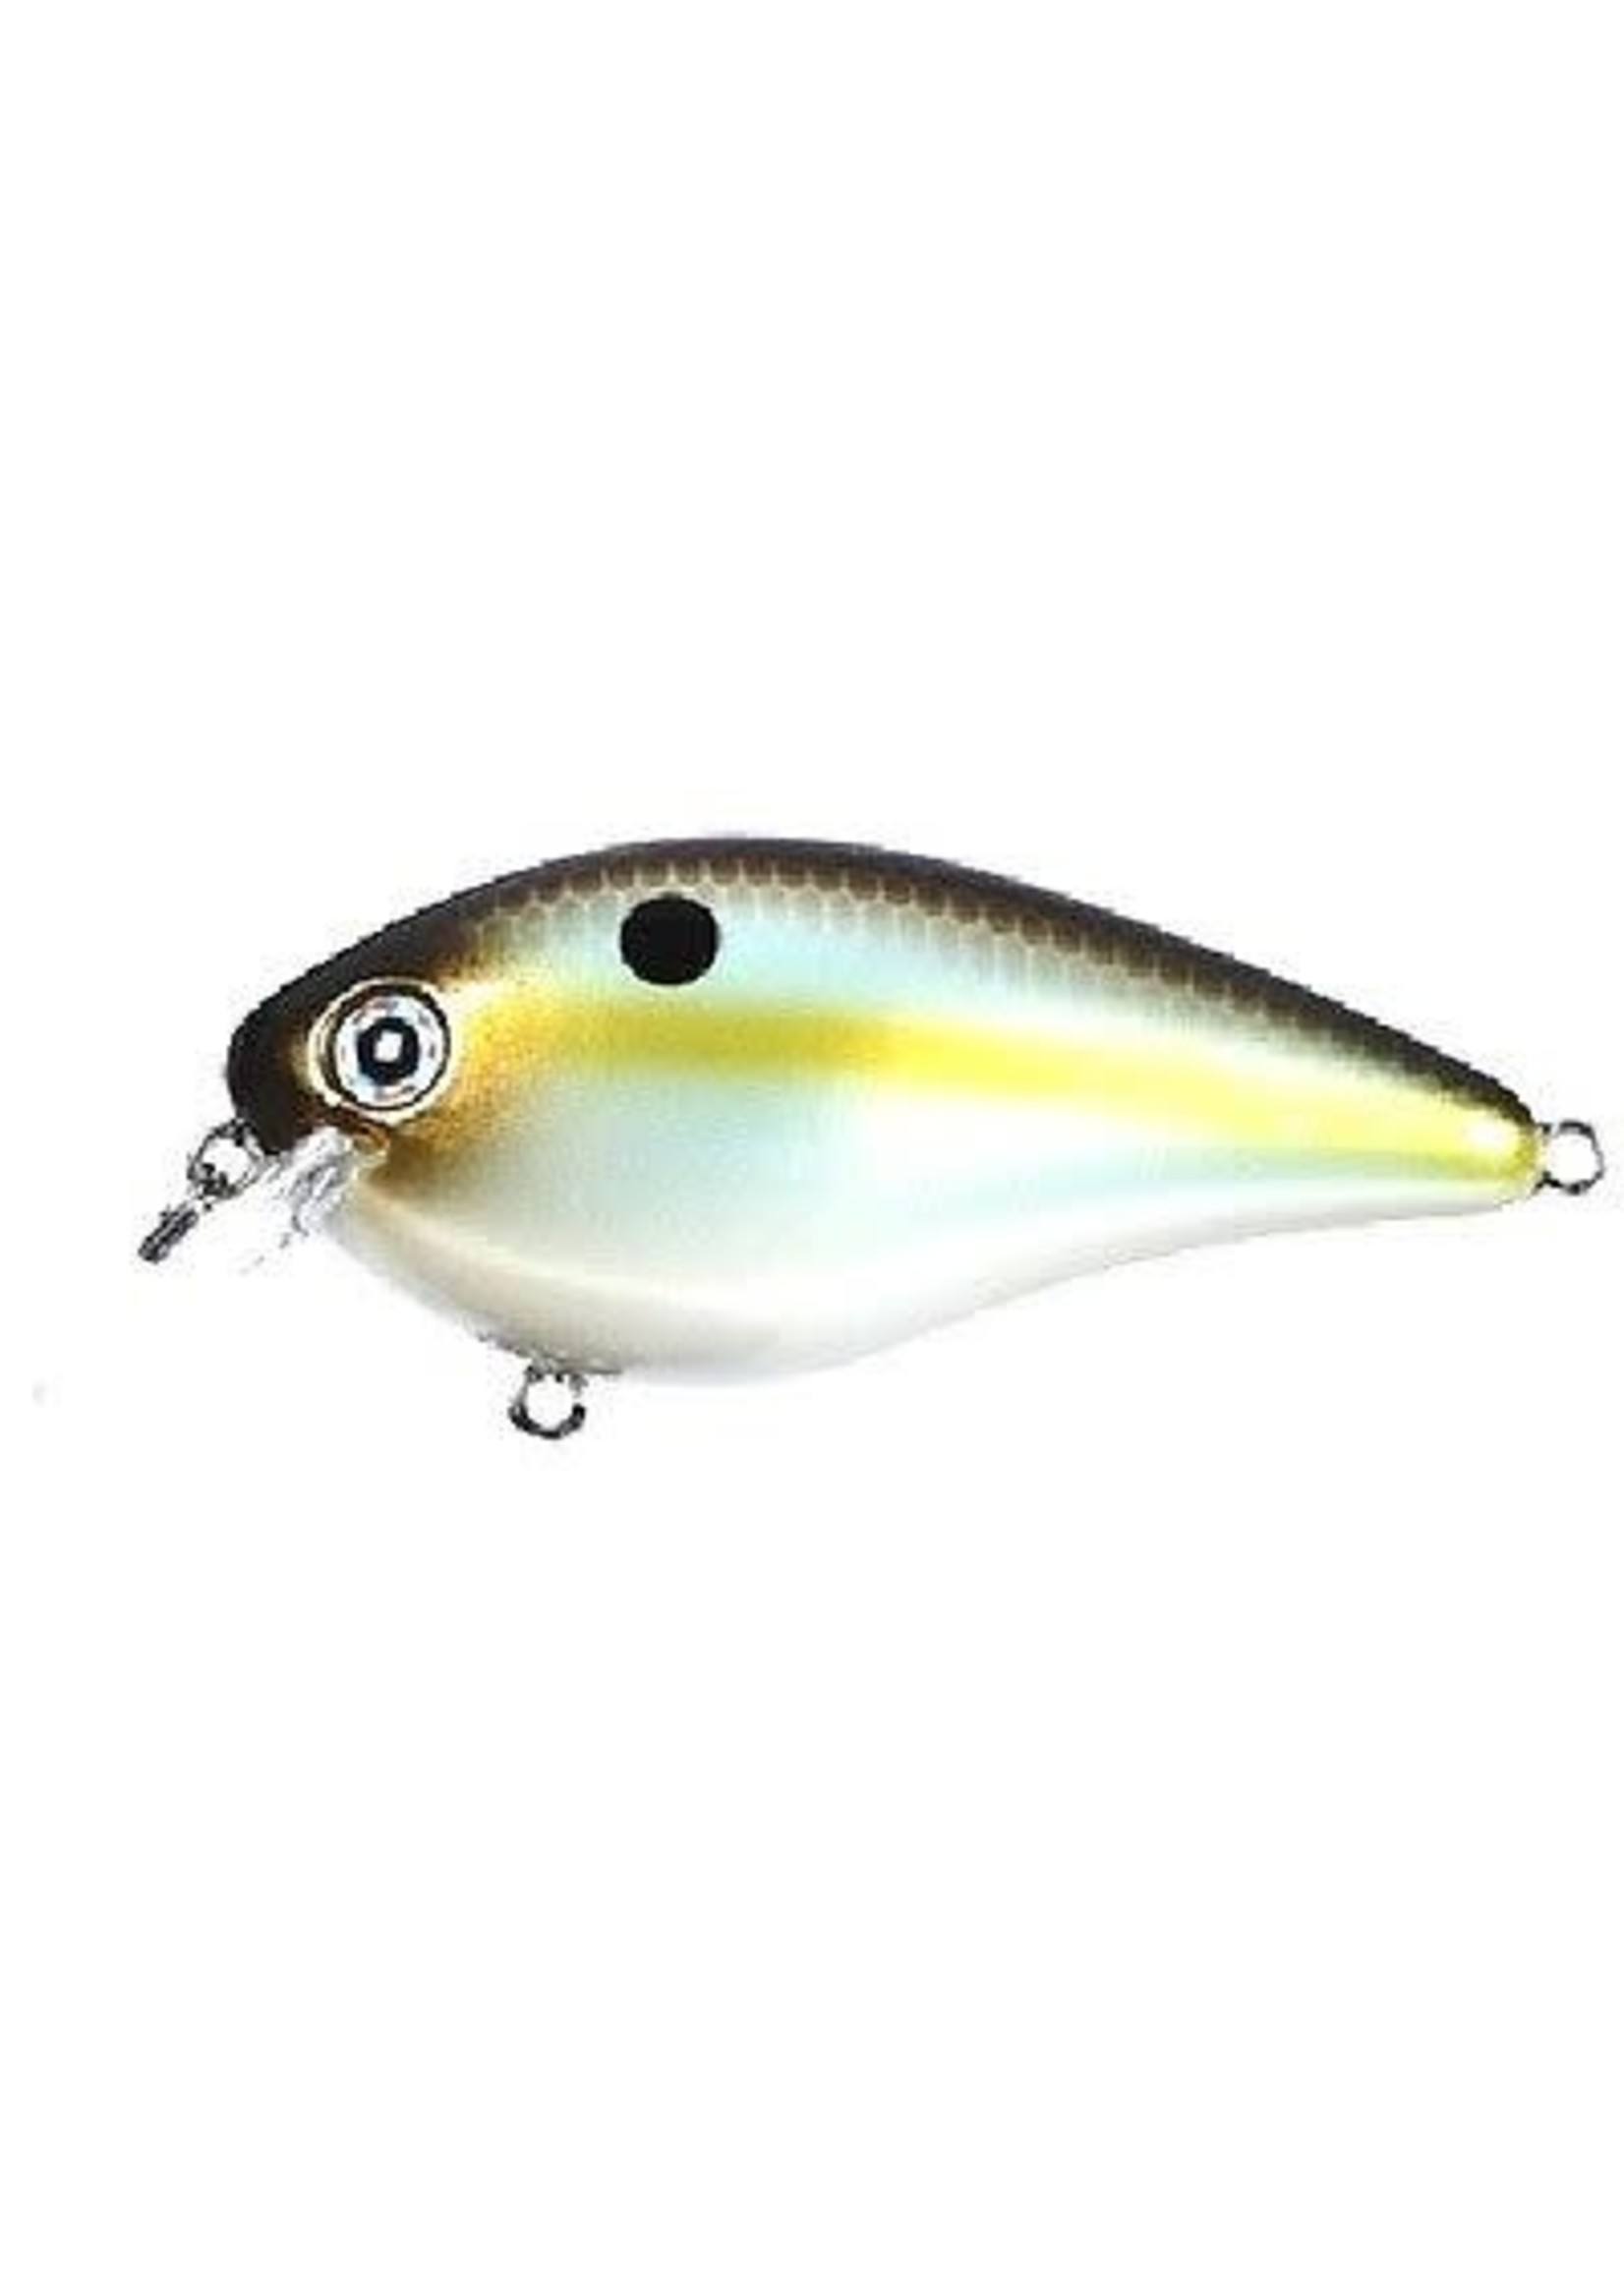 STRIKE KING KVD SQUARE 2.5 SUMMER SEXY SHAD - Throw it Again Tackle